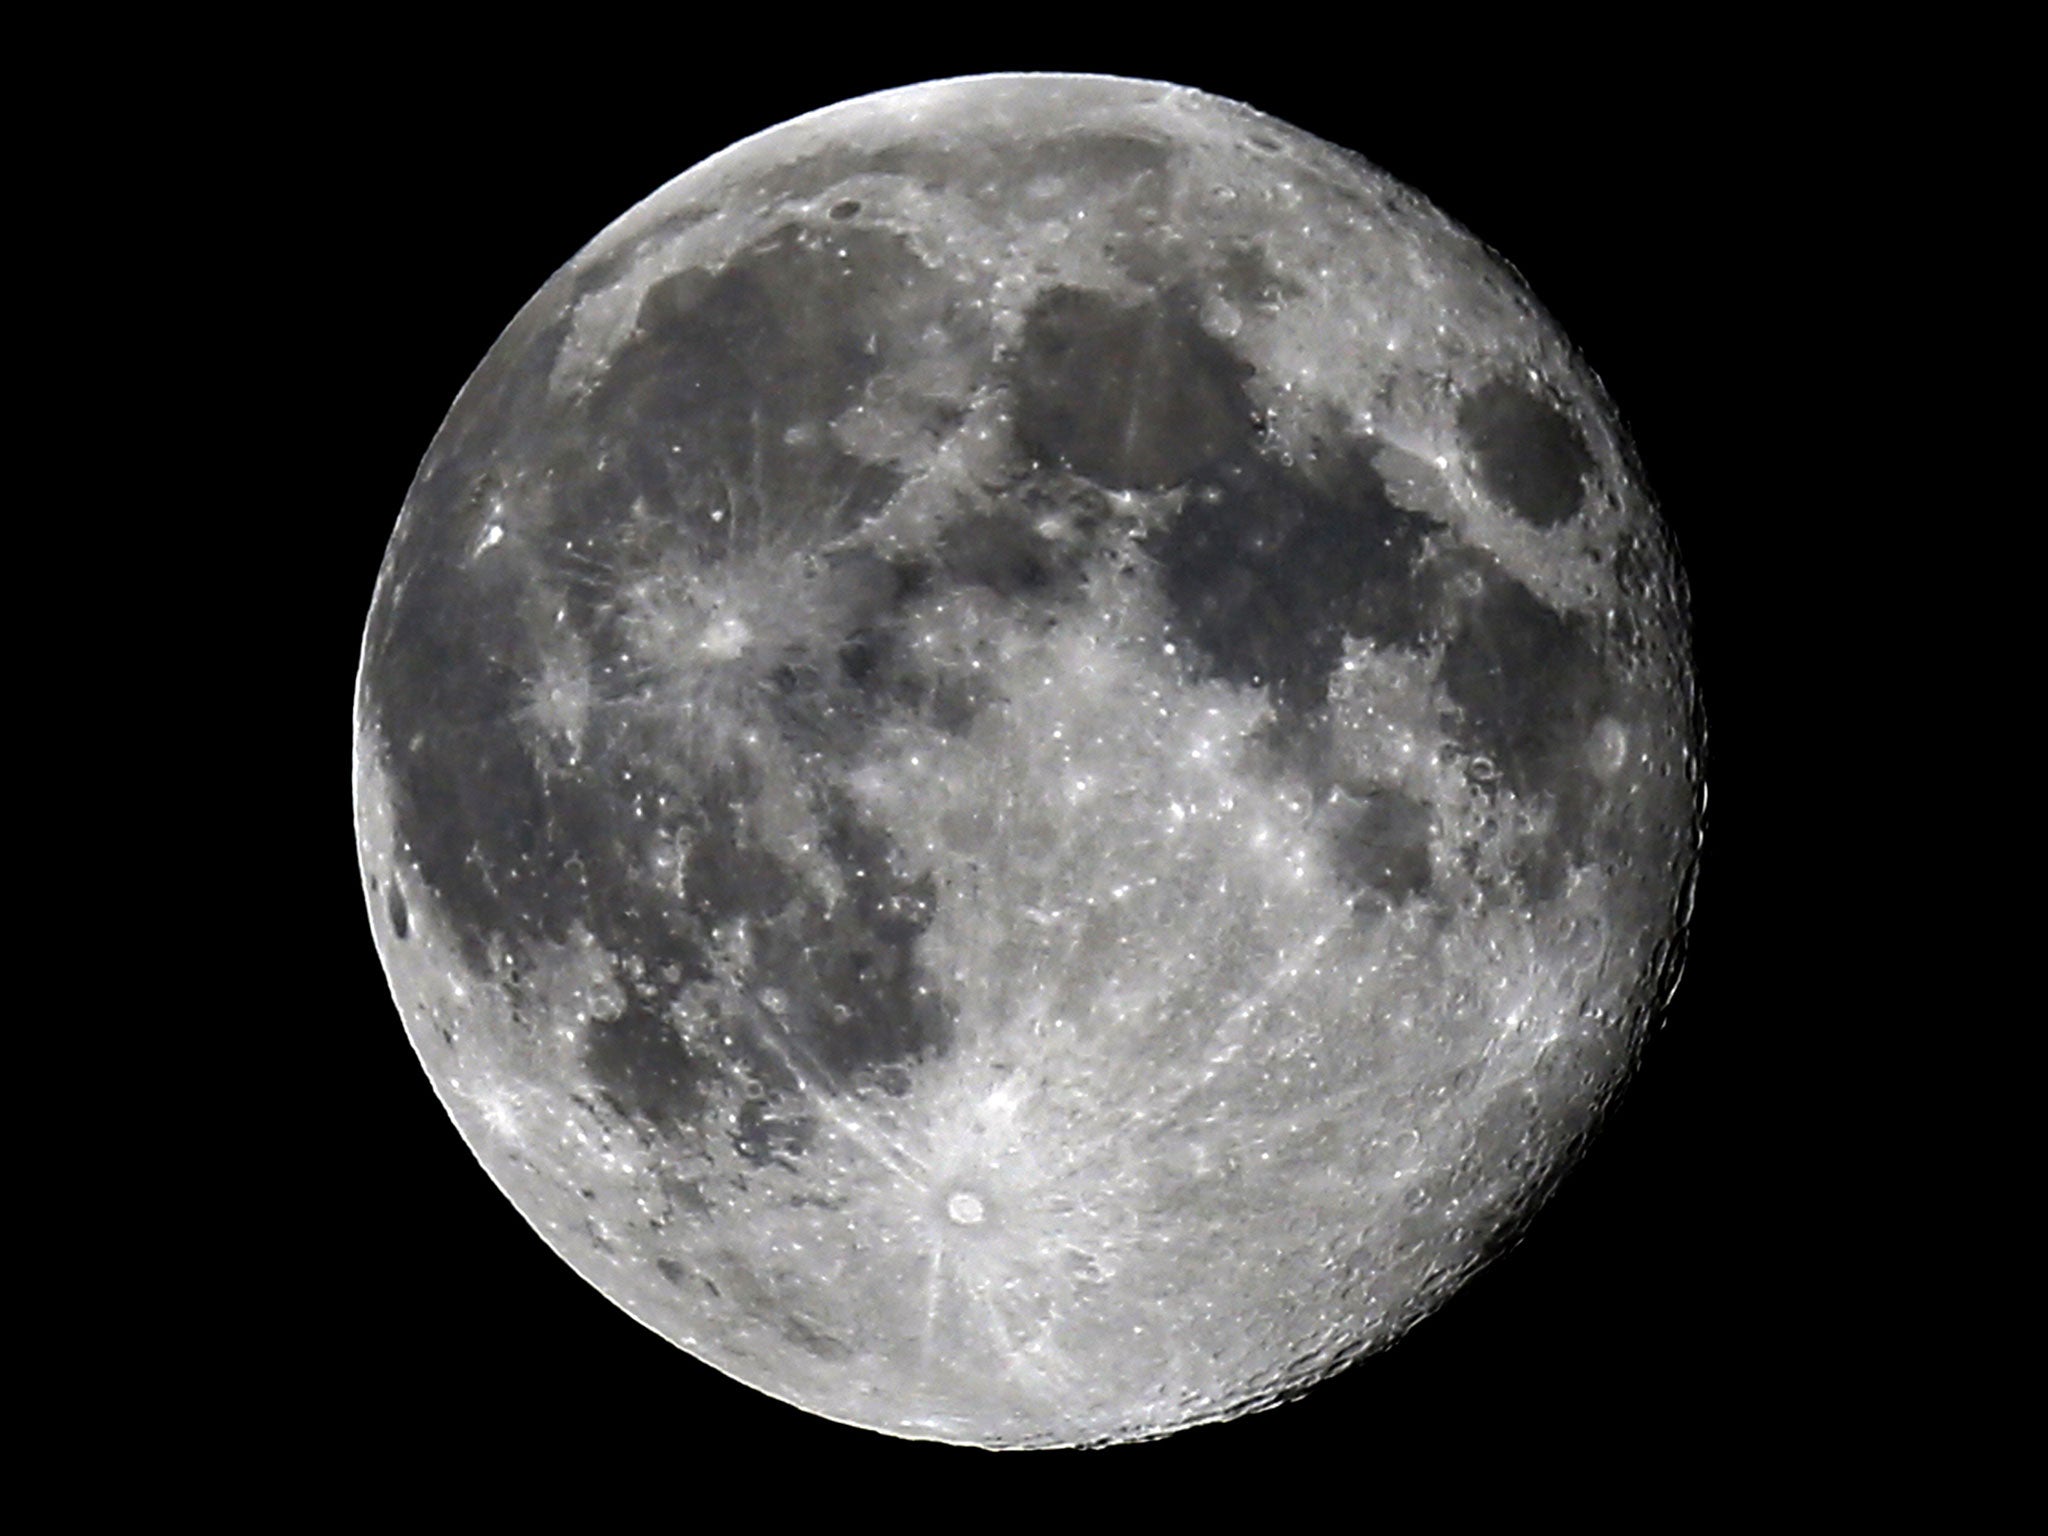 On Wednesday the moon will appear to be 4 per cent smaller than usual as it reaches its apogee